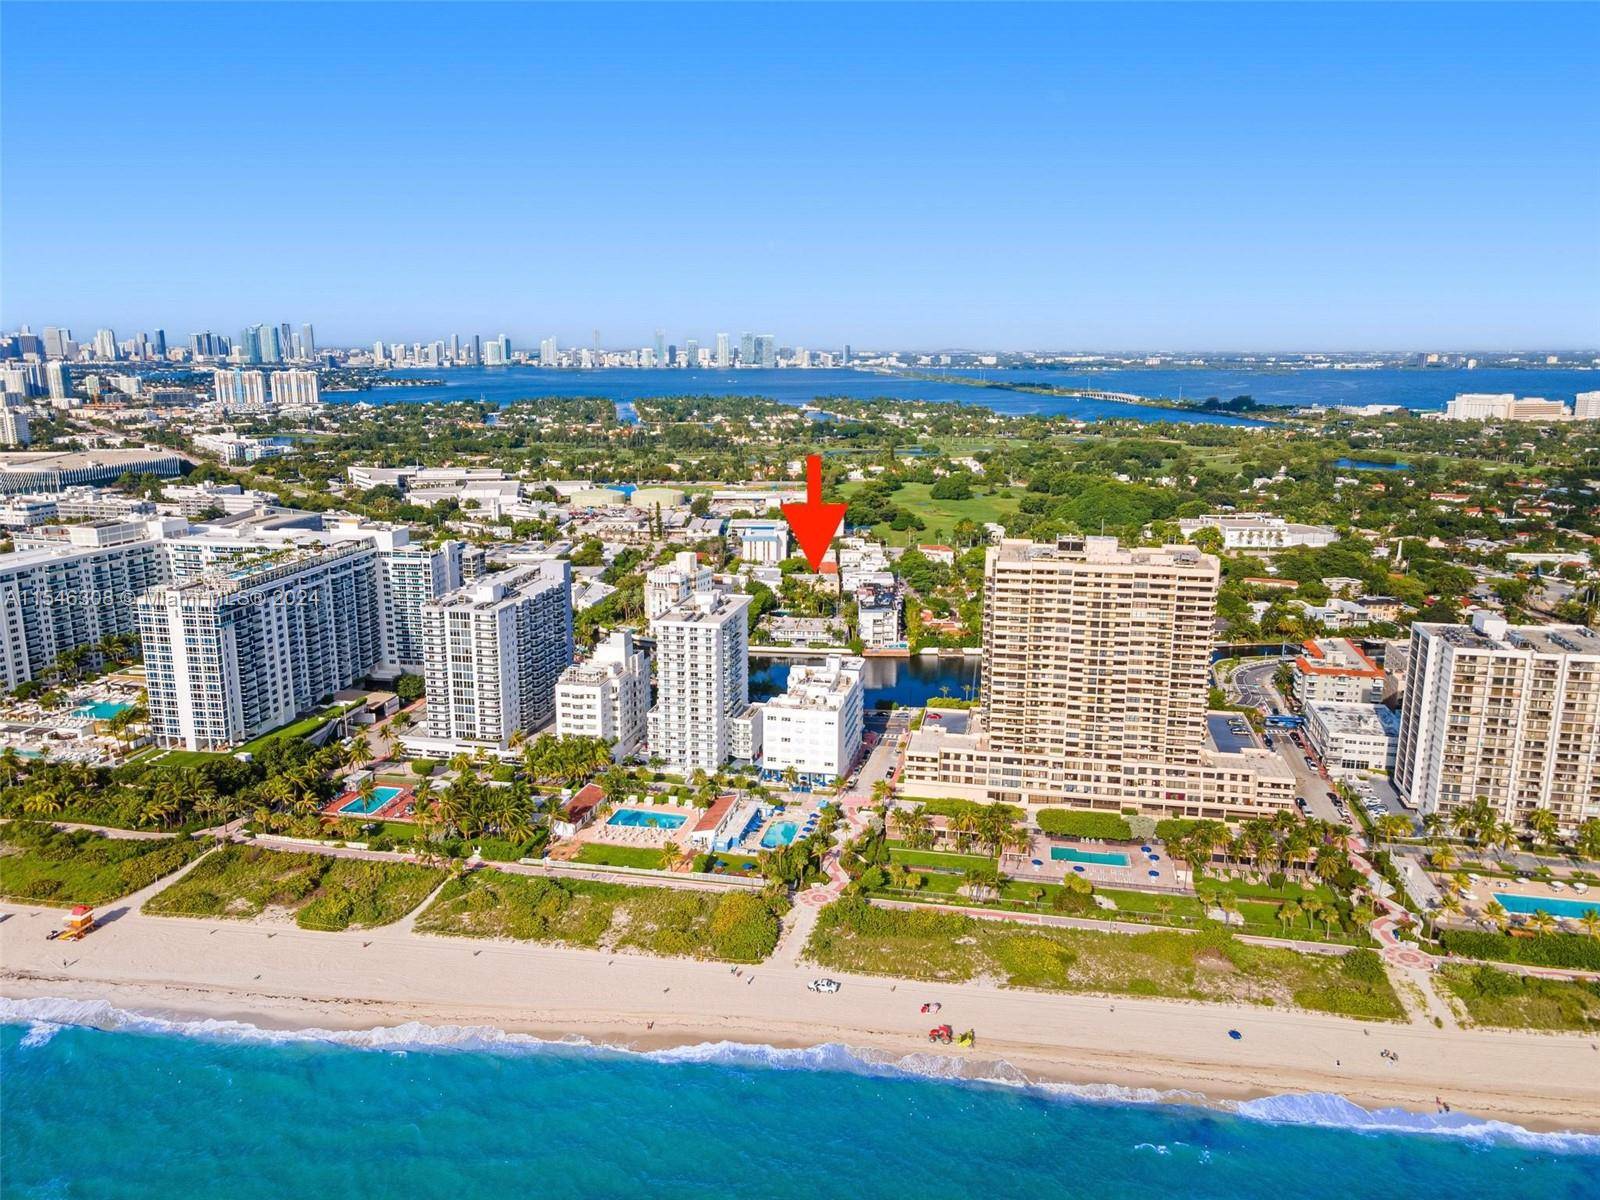 Amazing 16 unit multi family property is located in one of the best areas in South Beach just 2 blocks from the ocean.